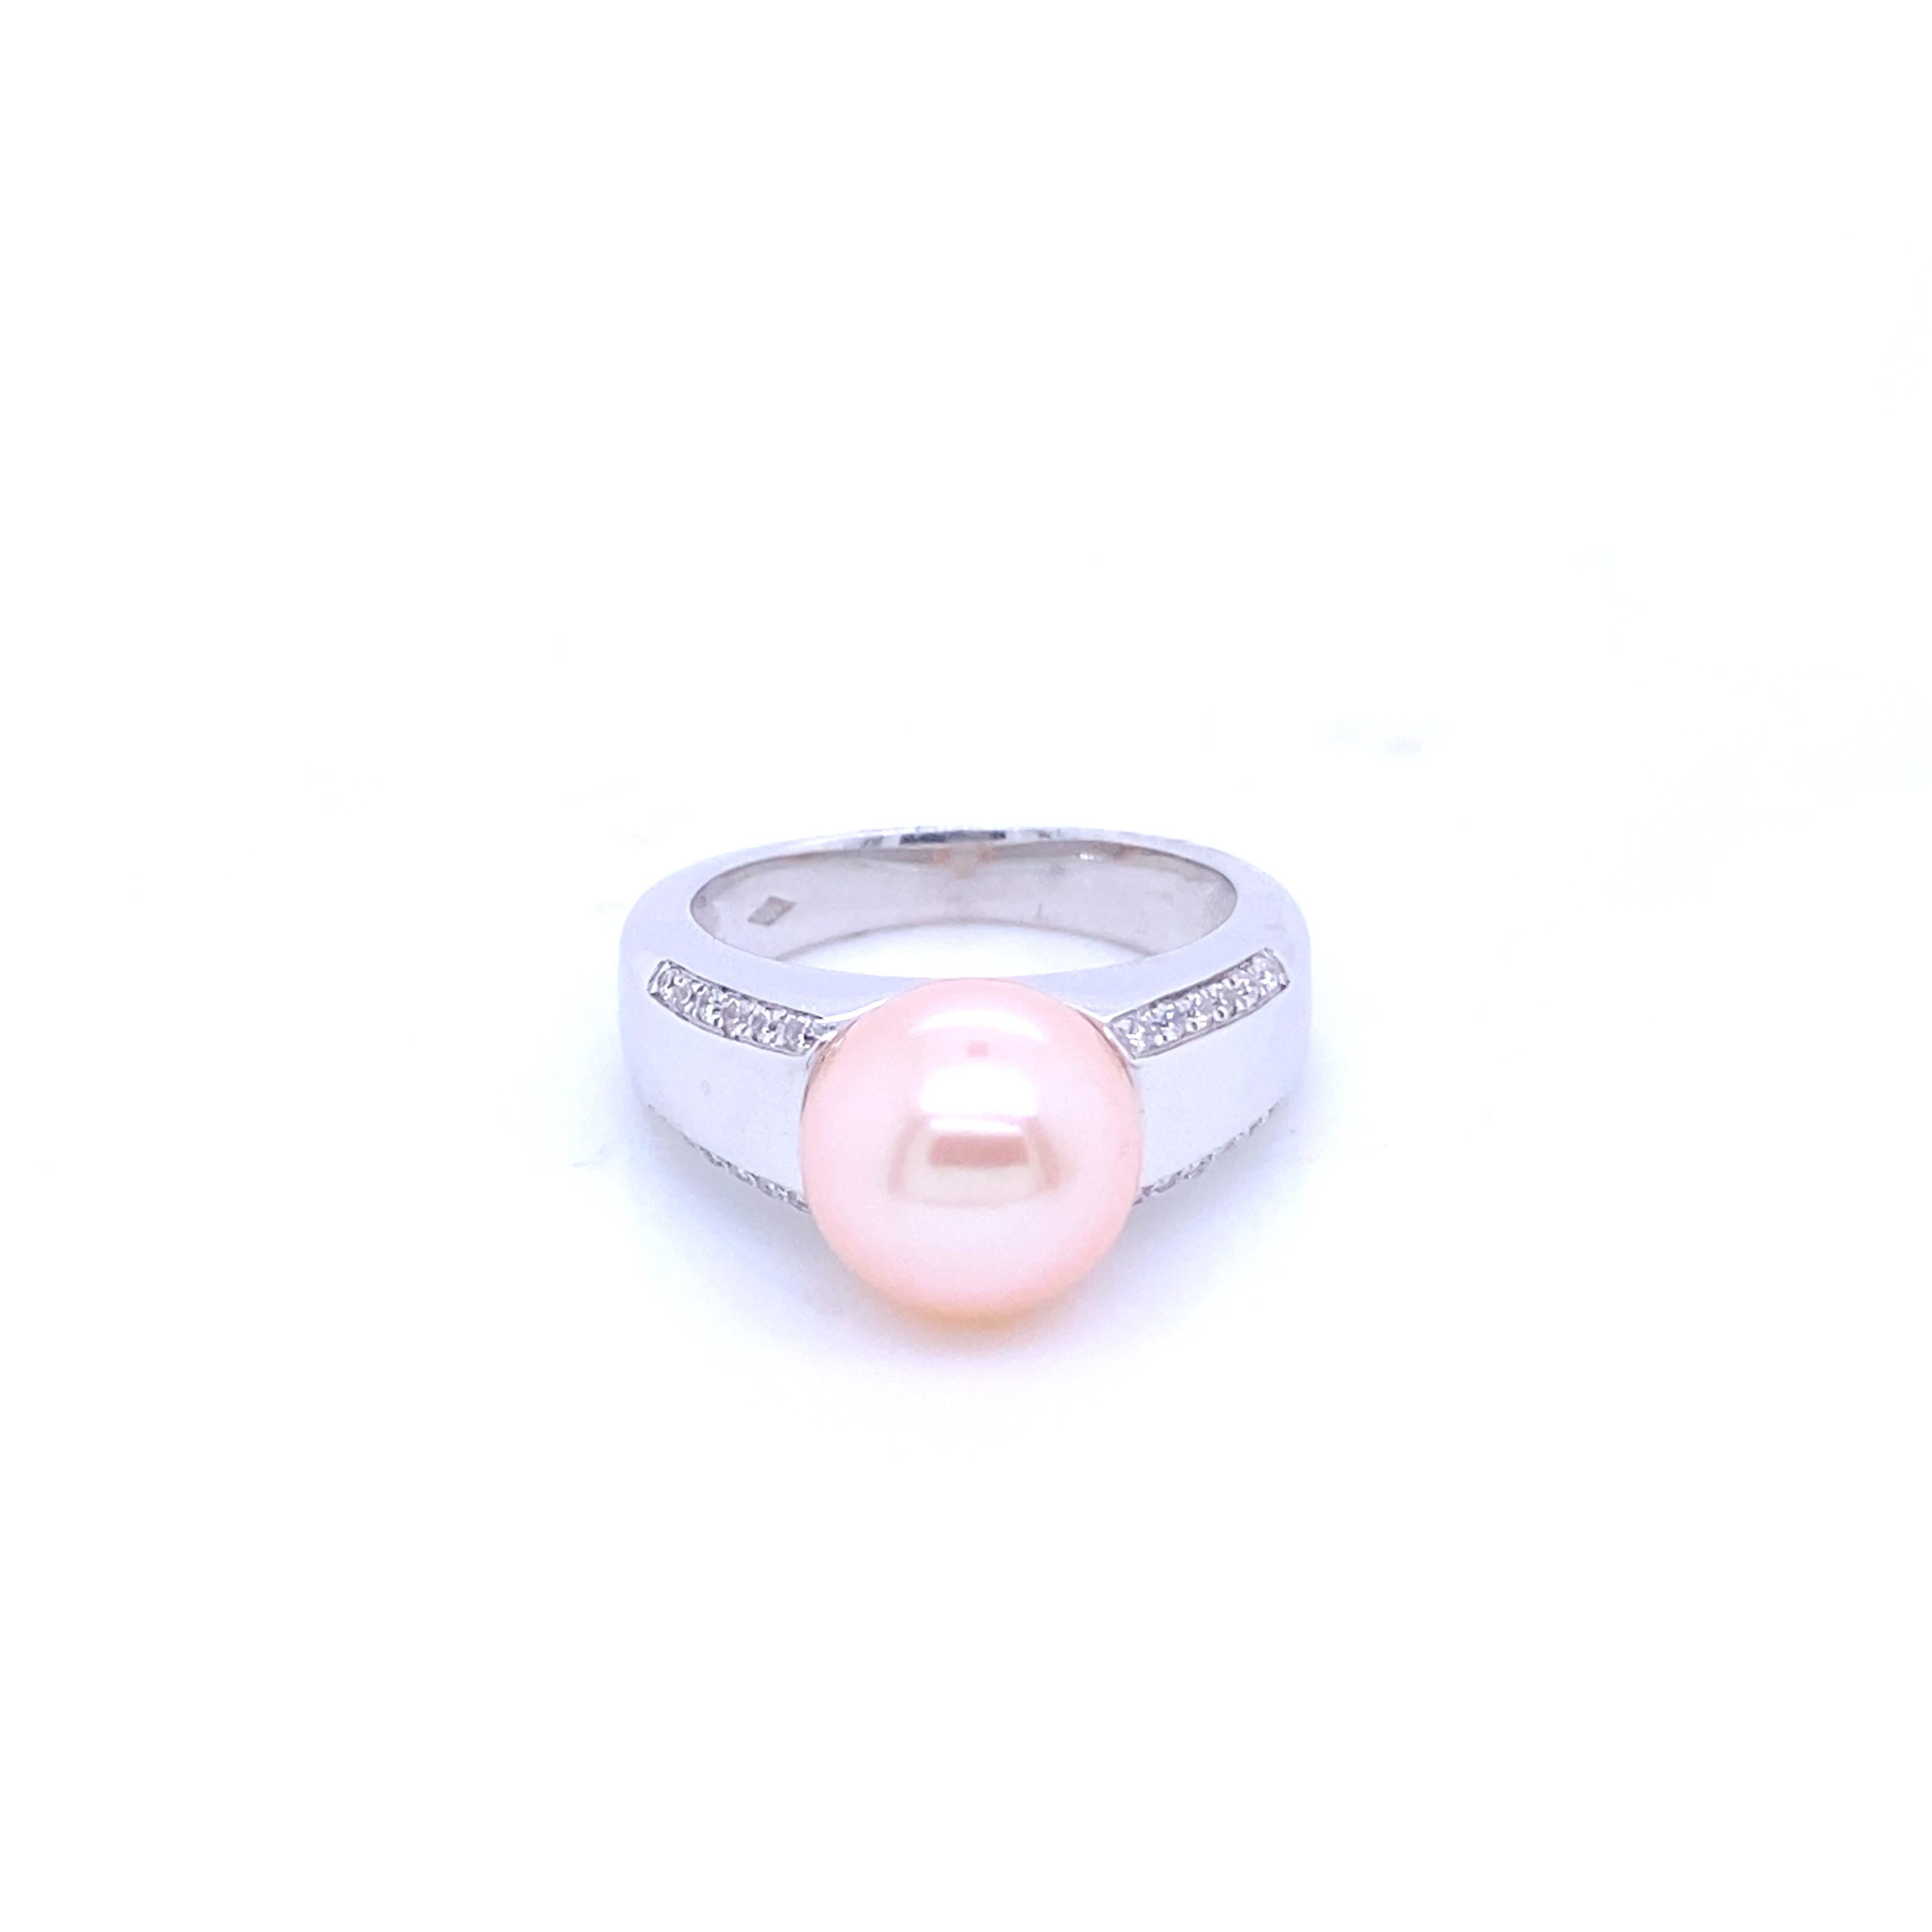 White Gold Ring with Pink Pearl and Diamonds
French Collection by Mesure et Art du Temps. 

Ring in 18 Carat white gold surmounted by a 9.5/10 pink pearl accompanied by 24 brilliant-cut diamonds, the diamonds weigh 0.16 grams. The weight of the ring